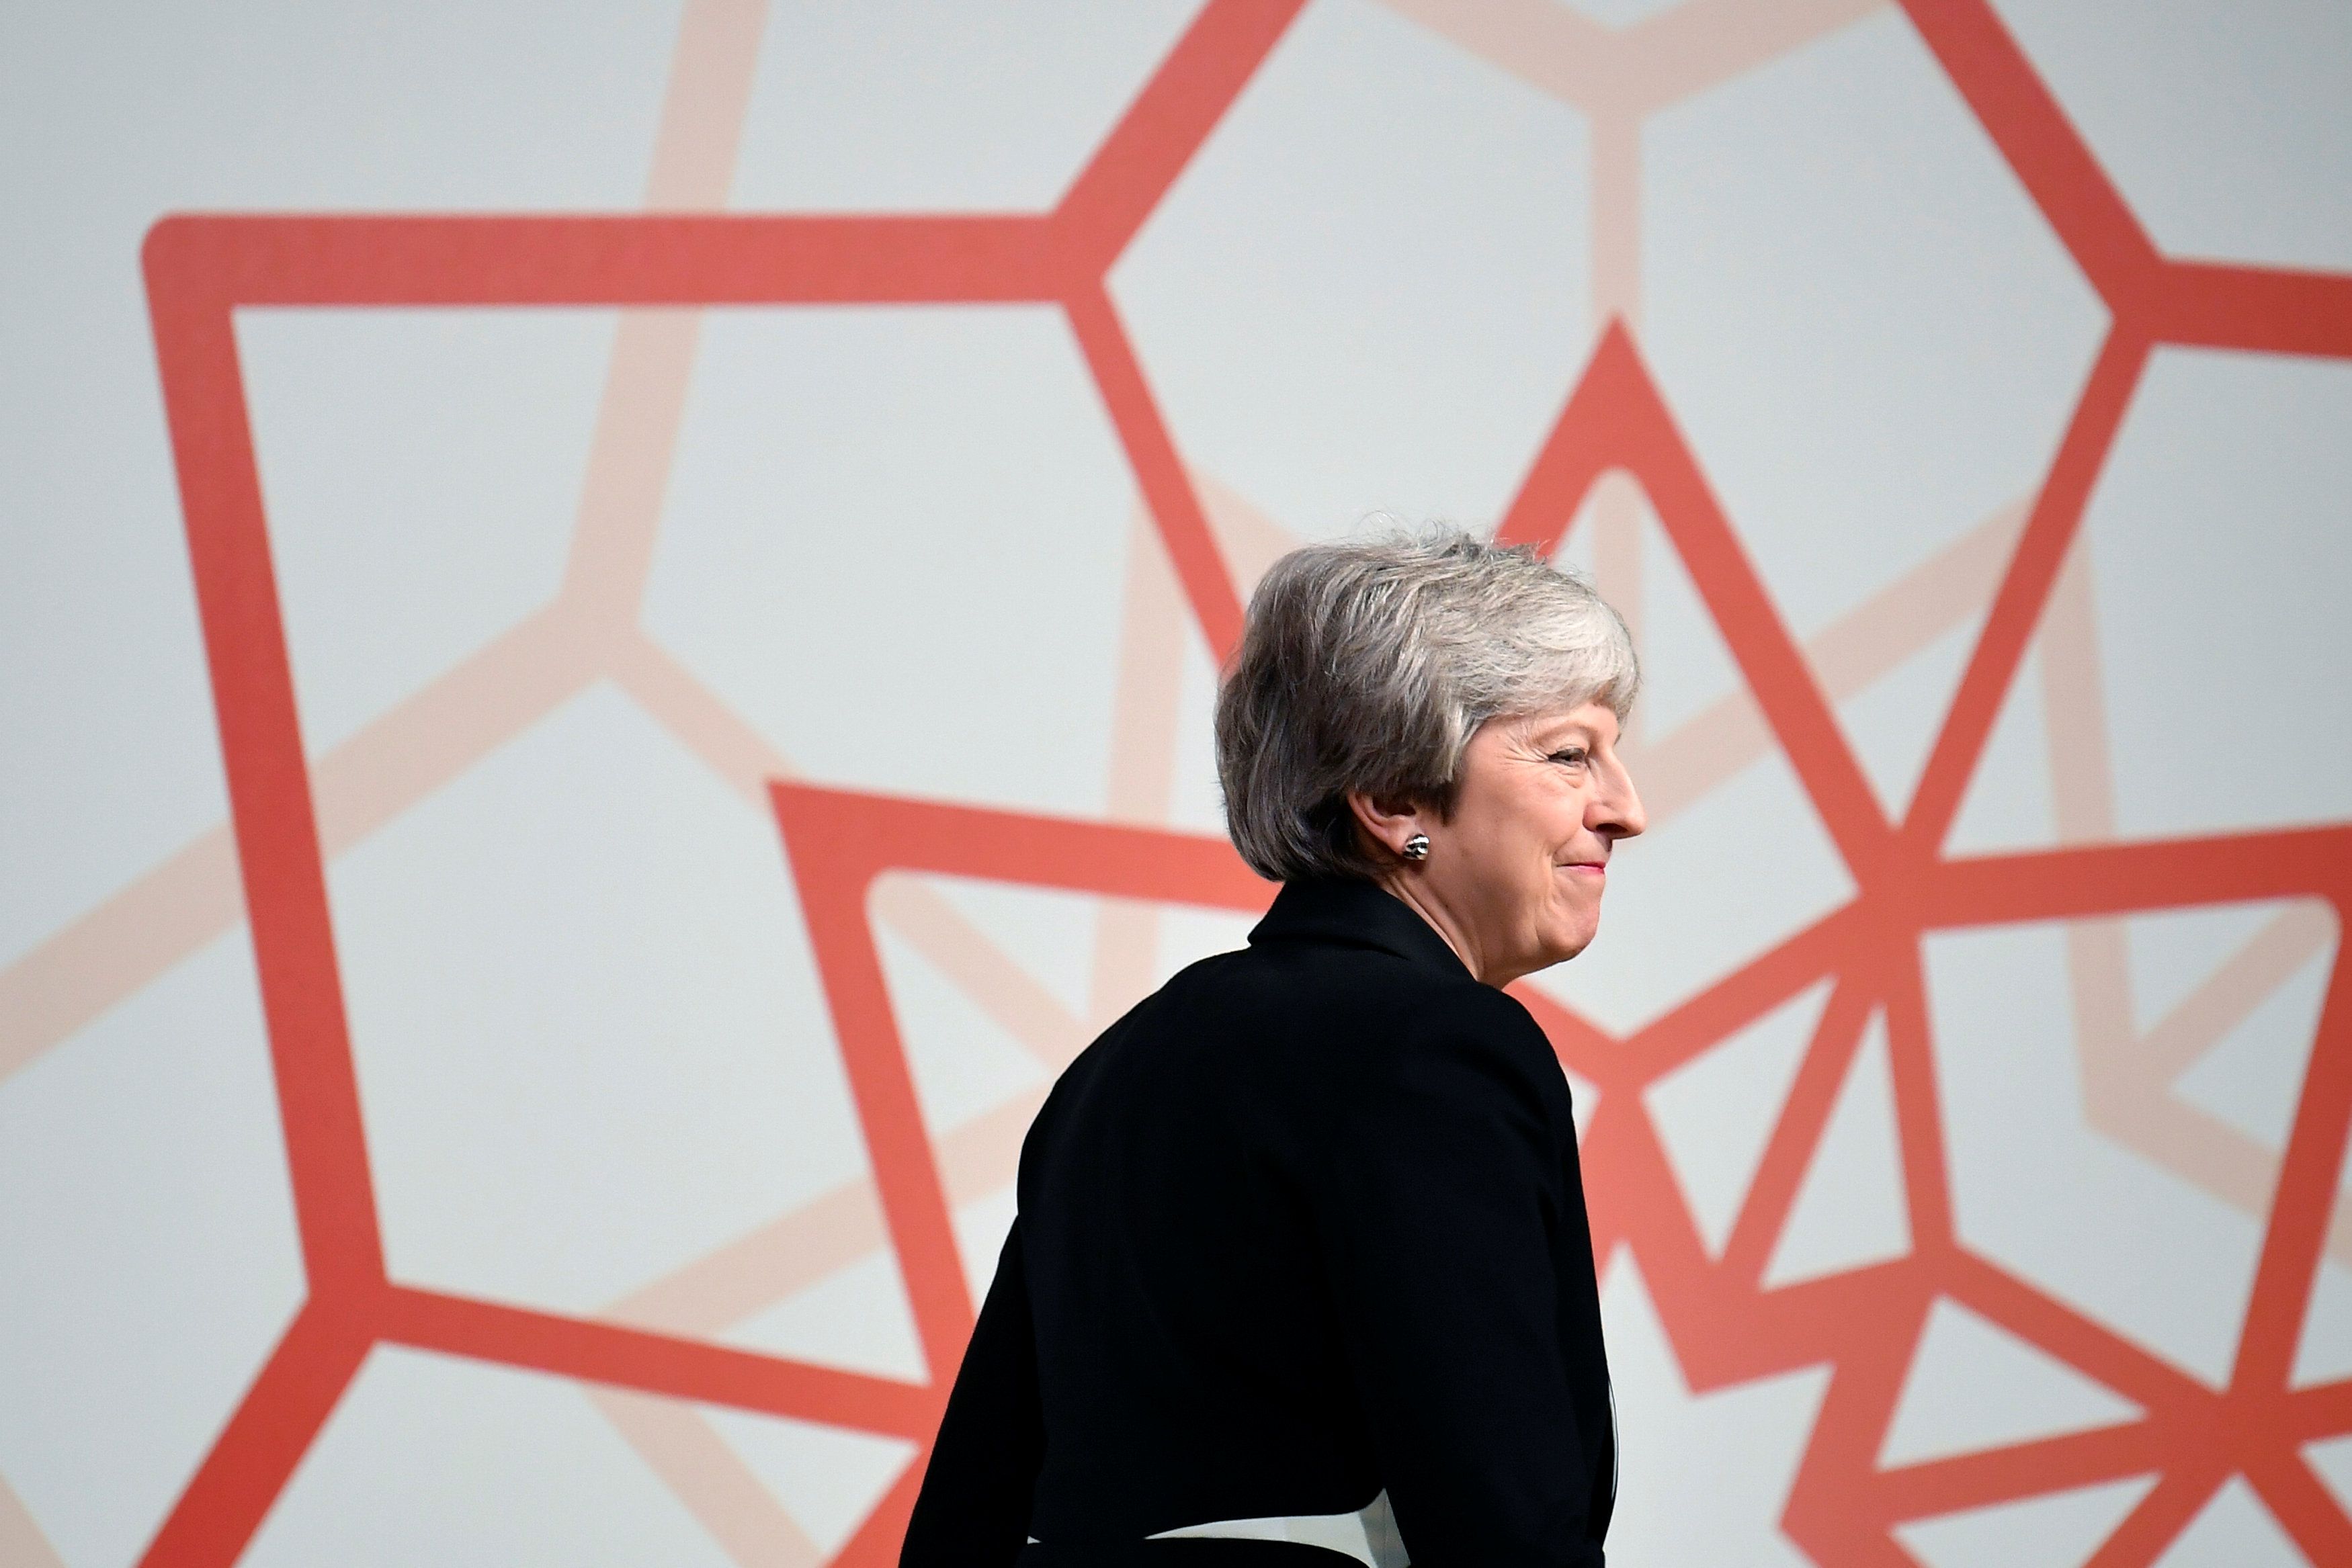 LONDON, ENGLAND - FEBRUARY 28: Britain's Prime Minister Theresa May speaks at the Jordan Growth and Opportunity Conference on February 28, 2019 in London, England. (Photo by Toby Melville WPA Pool/Getty Images)